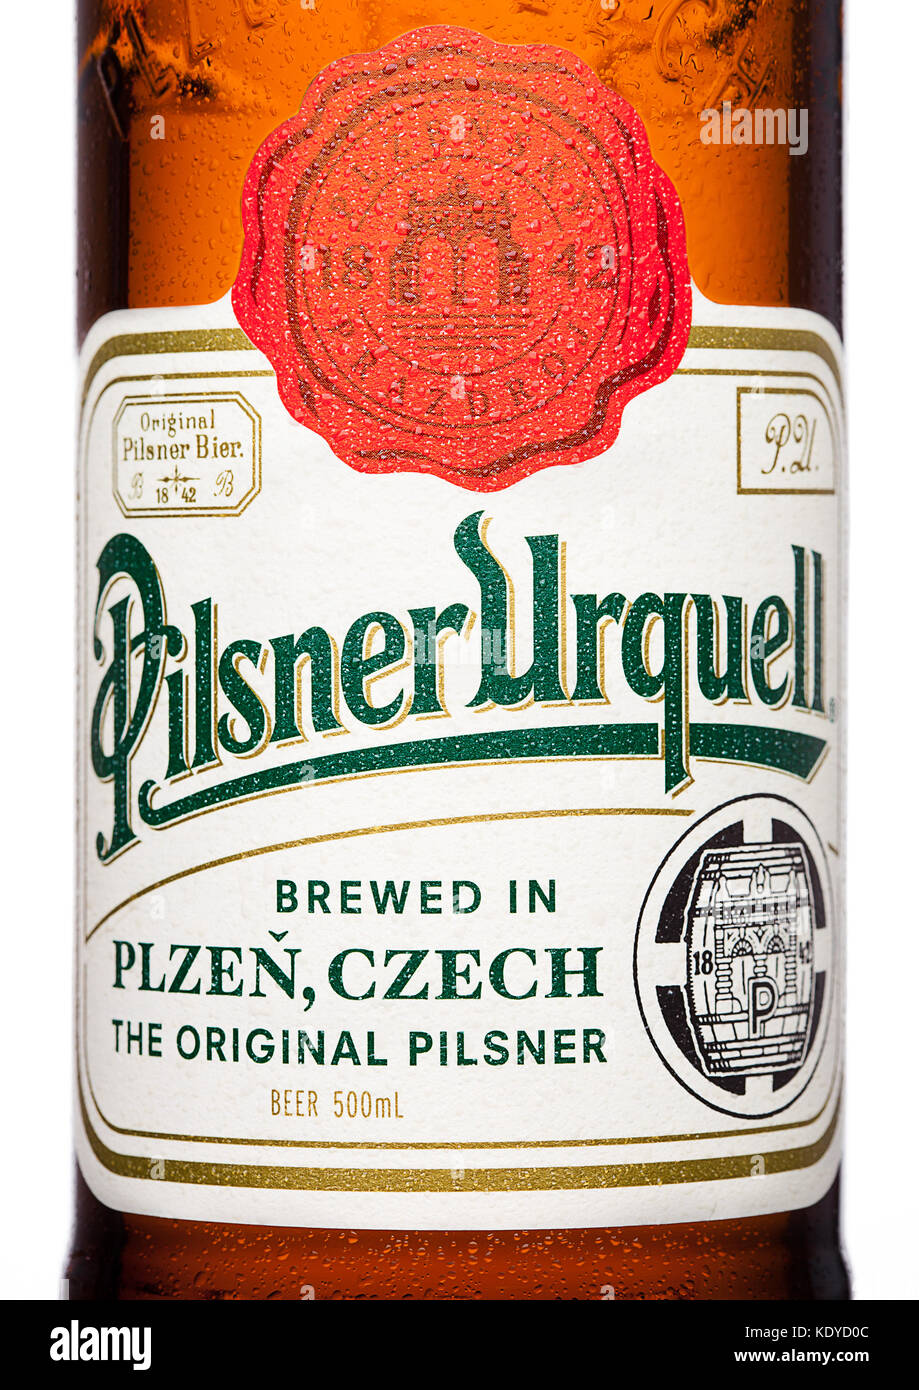 LONDON,UK - MARCH 21, 2017 :  Bottle label of Pilsner Urquell beer on white background.It has been produced since 1842 in Pilsen, Czech Republic. Stock Photo